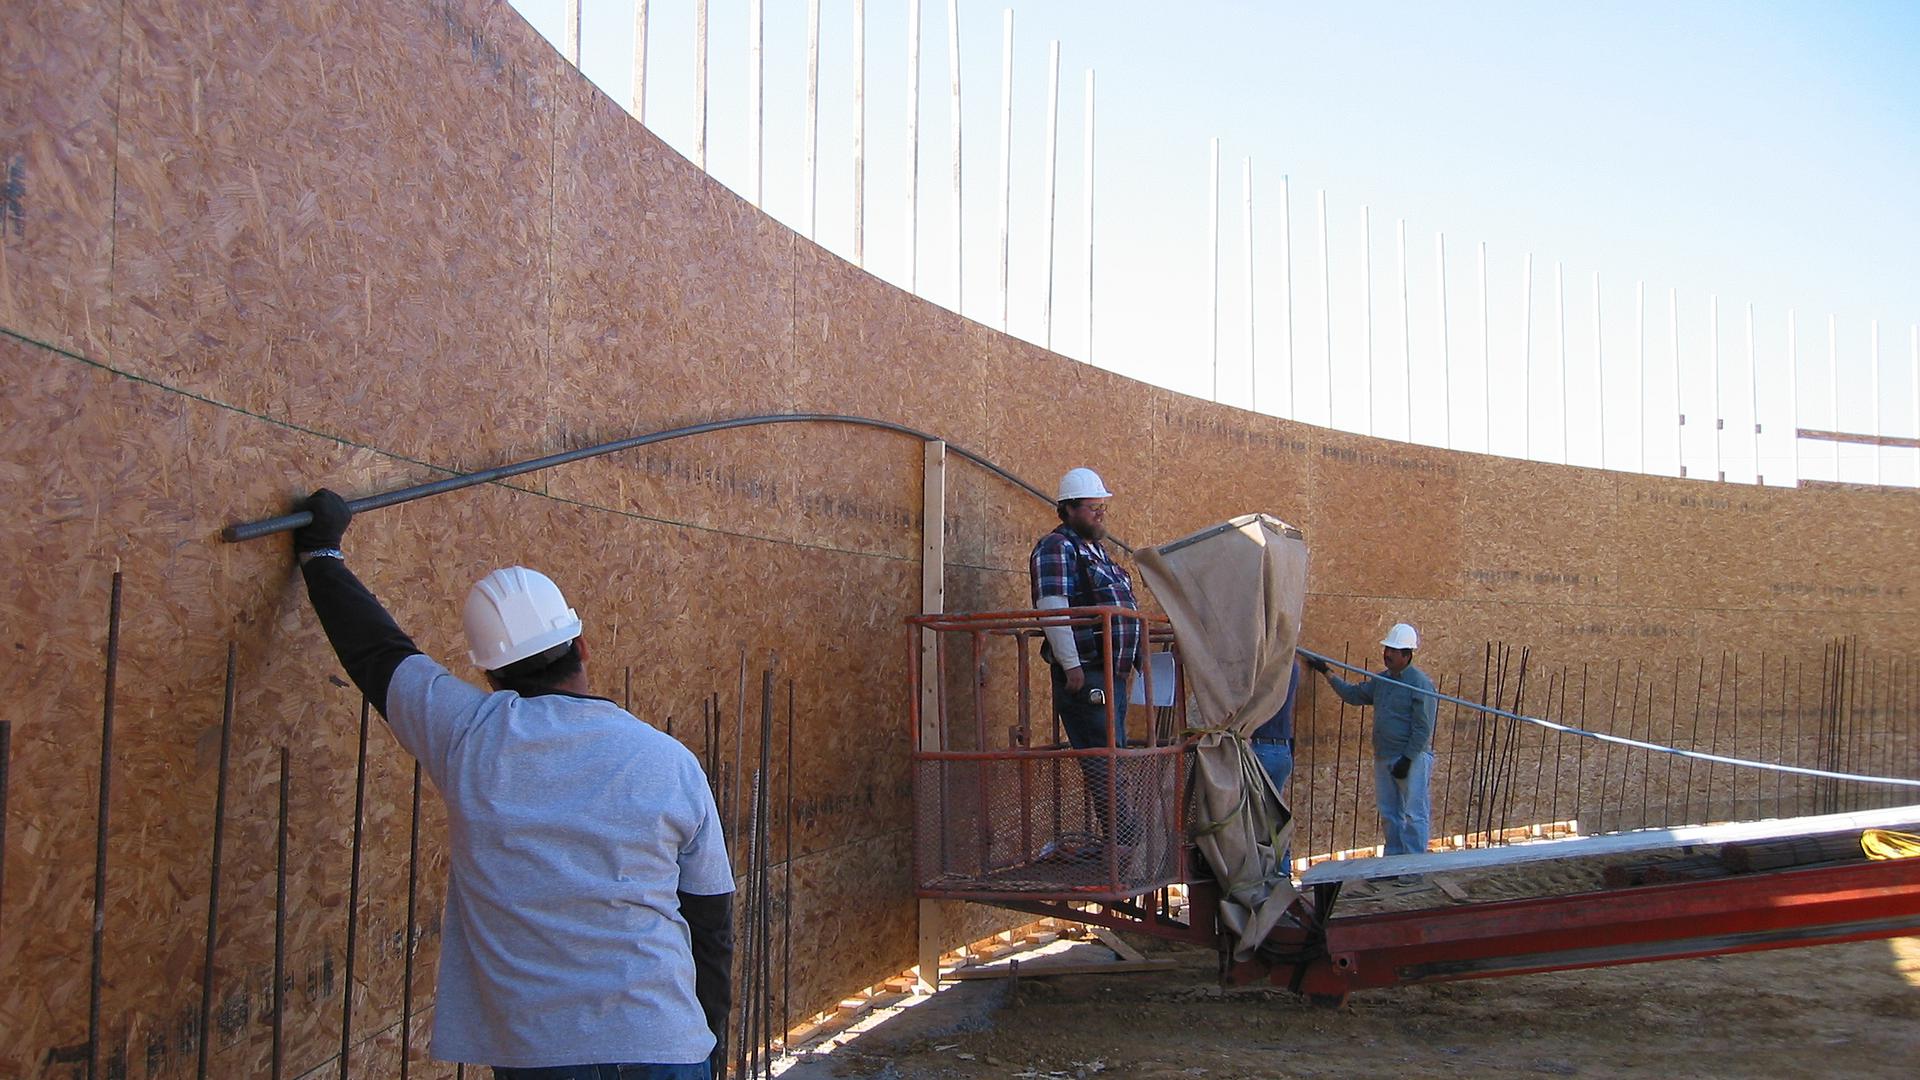 Workers attaching rebar to the plywood form.